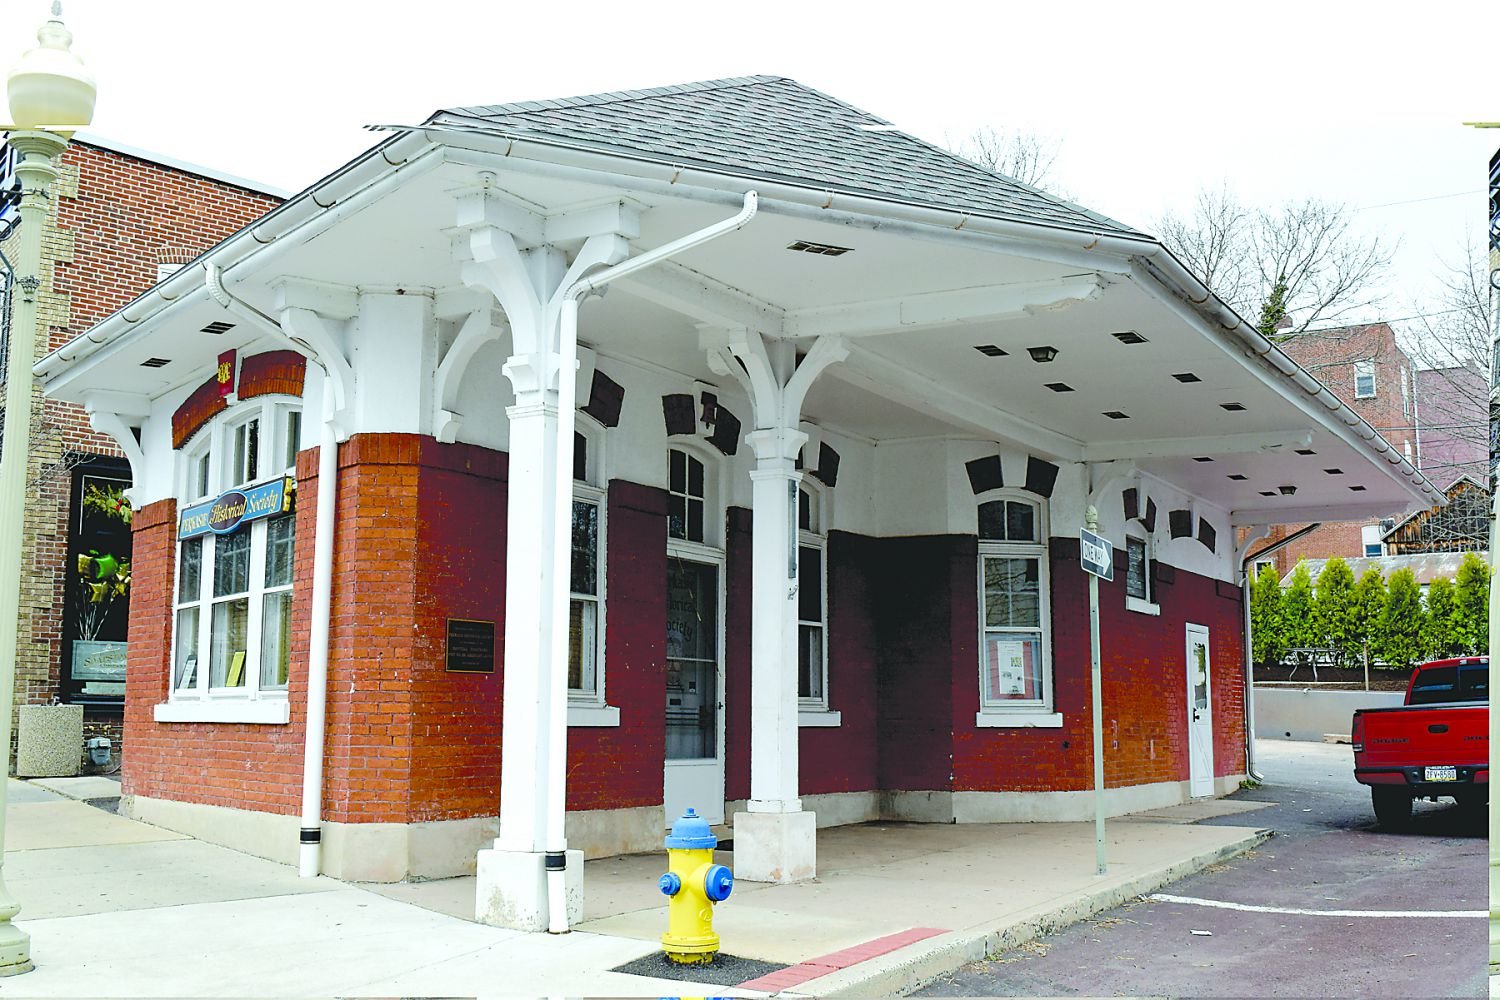 The Lehigh Valley Transit Station at 513 W. Walnut St. is owned by the Perkasie Historical Society. It was designed in 1912 by Wallace Ruhe and Robert Lange and used for trolley service until 1951. It’s currently a museum. Photograph by Scott Bomboy.